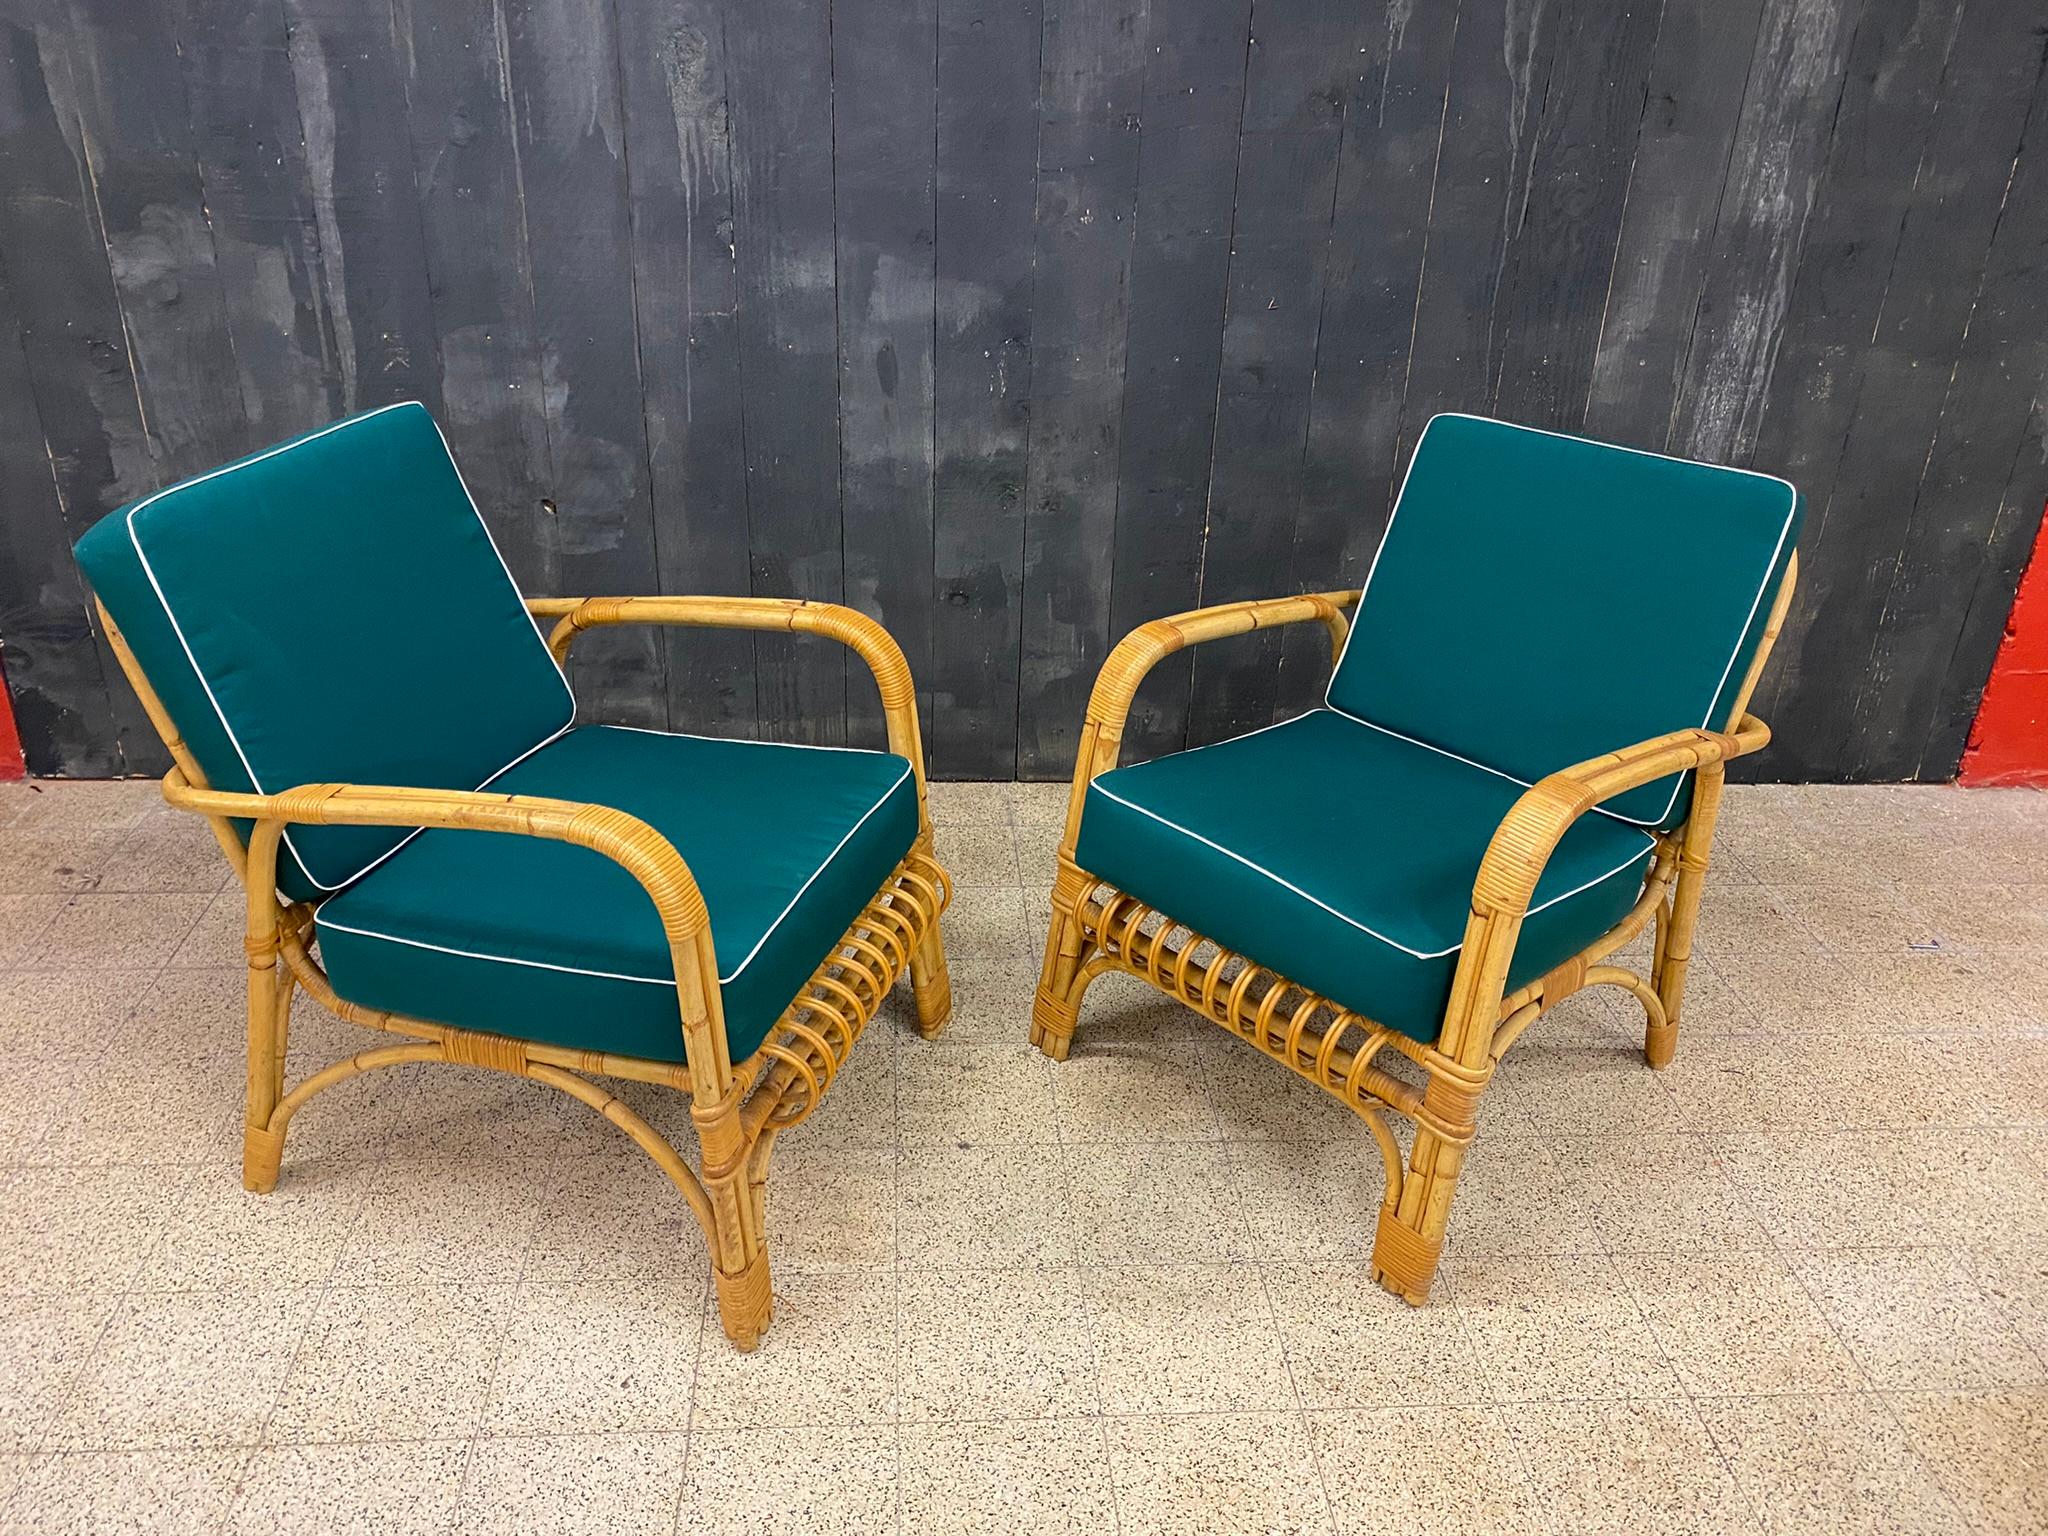 4 rattan armchairs and their cushions, circa 1970-1980.
2 sets of cushions are available, green and gray.